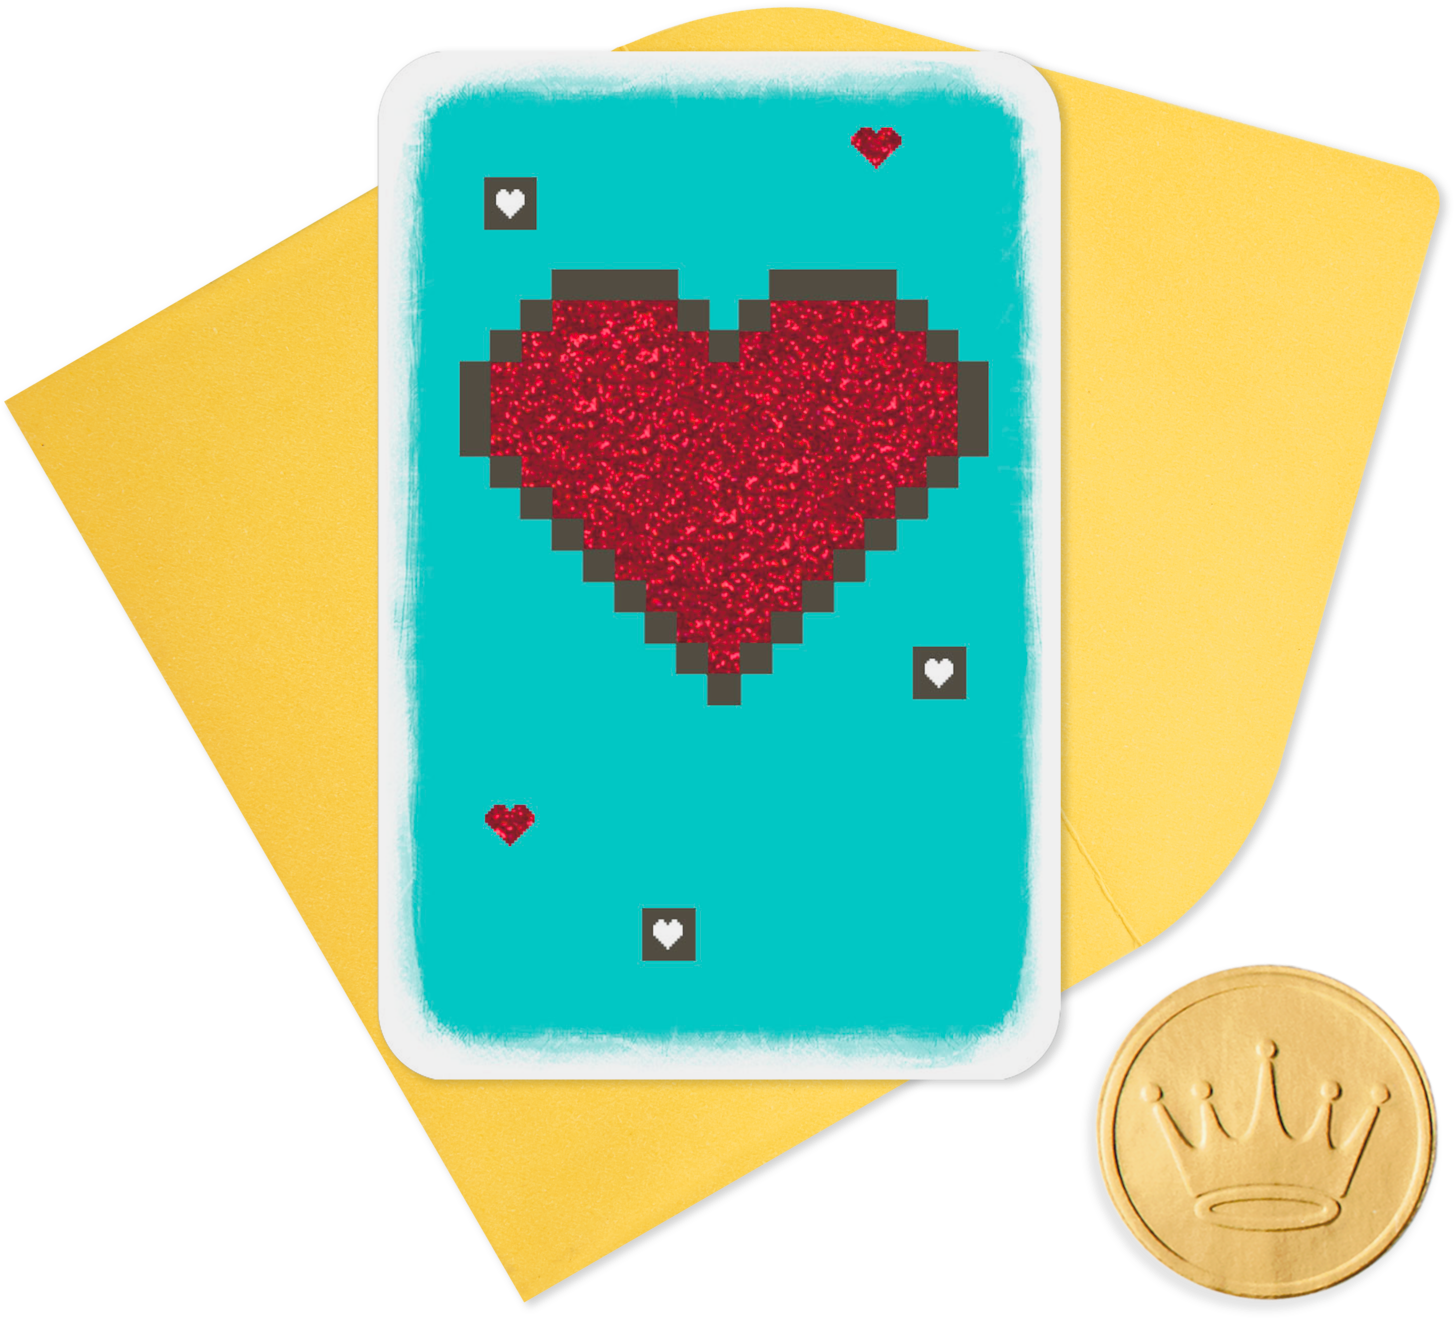 A Card With A Pixelated Heart On It Next To A Gold Coin